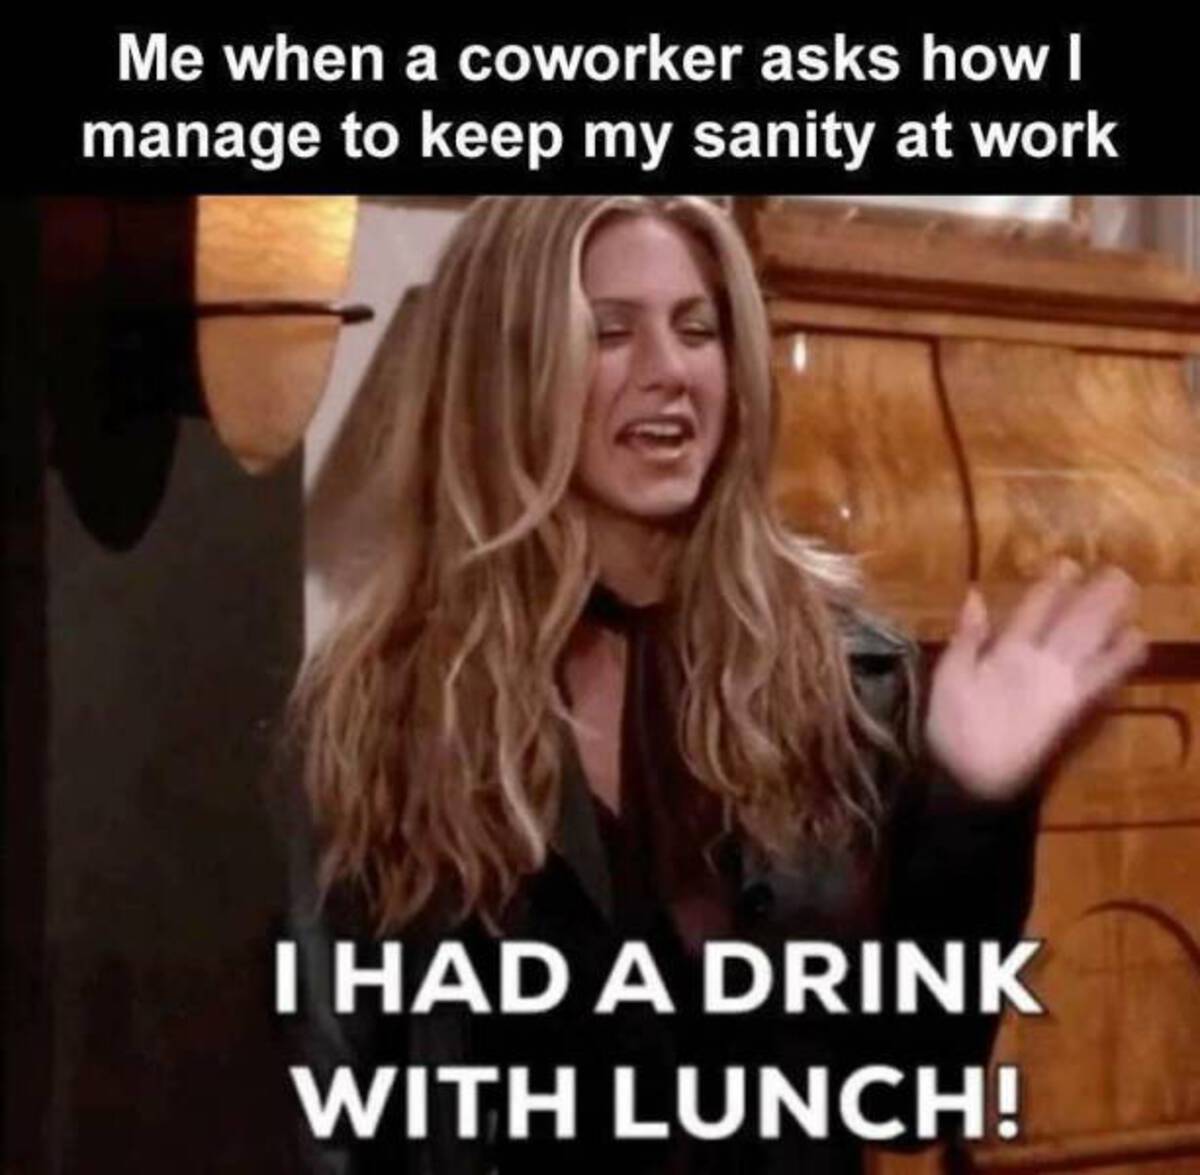 photo caption - Me when a coworker asks how I manage to keep my sanity at work I Had A Drink With Lunch!